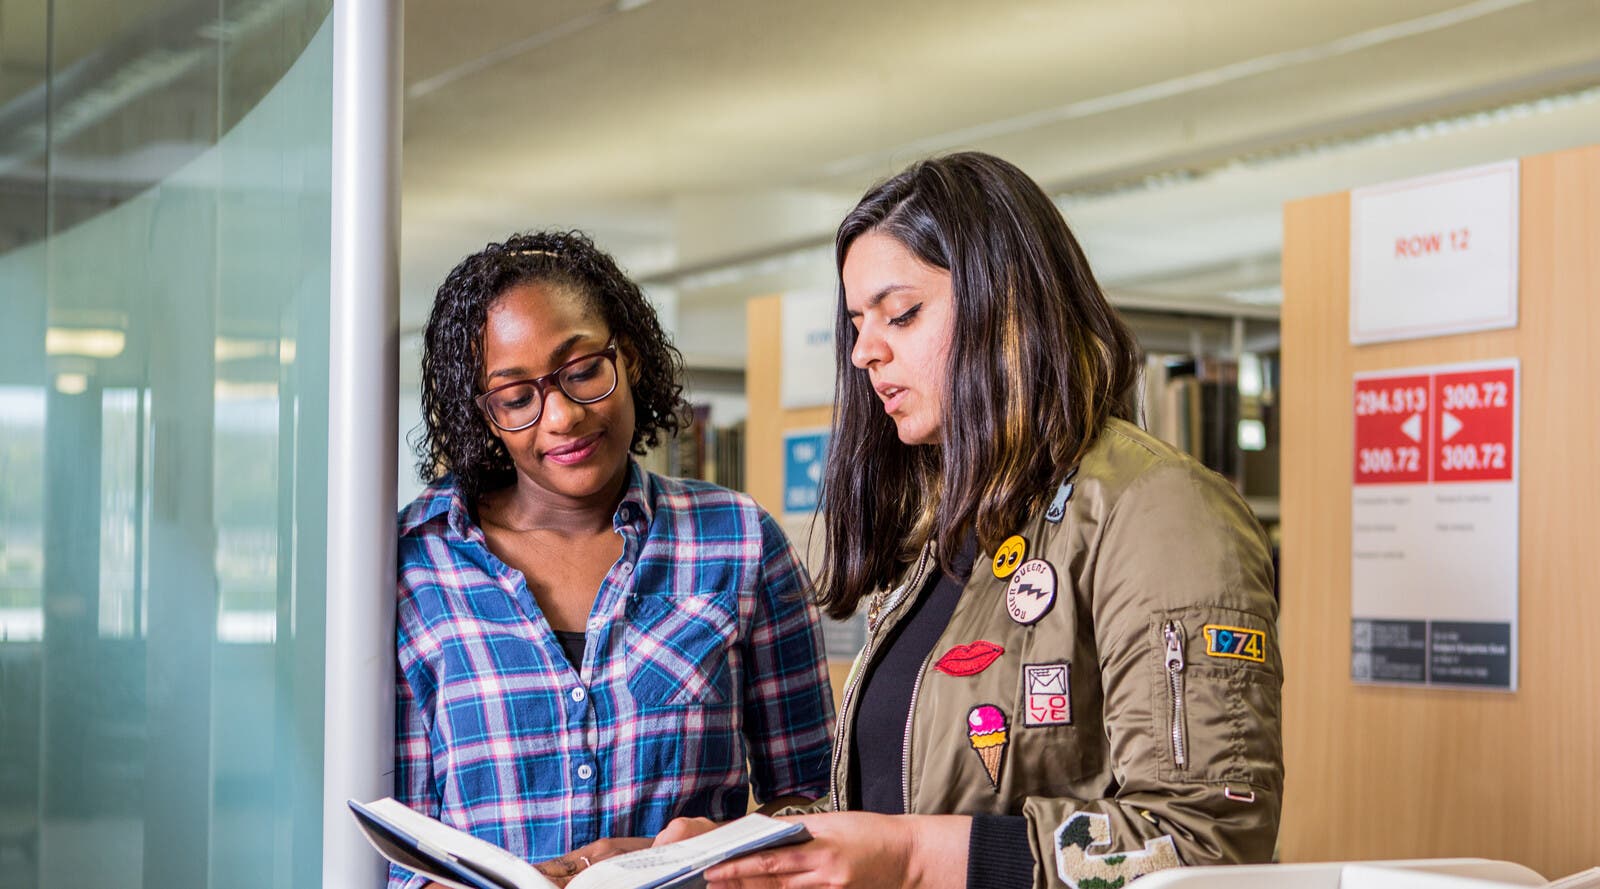 Two students compare notes at the University library